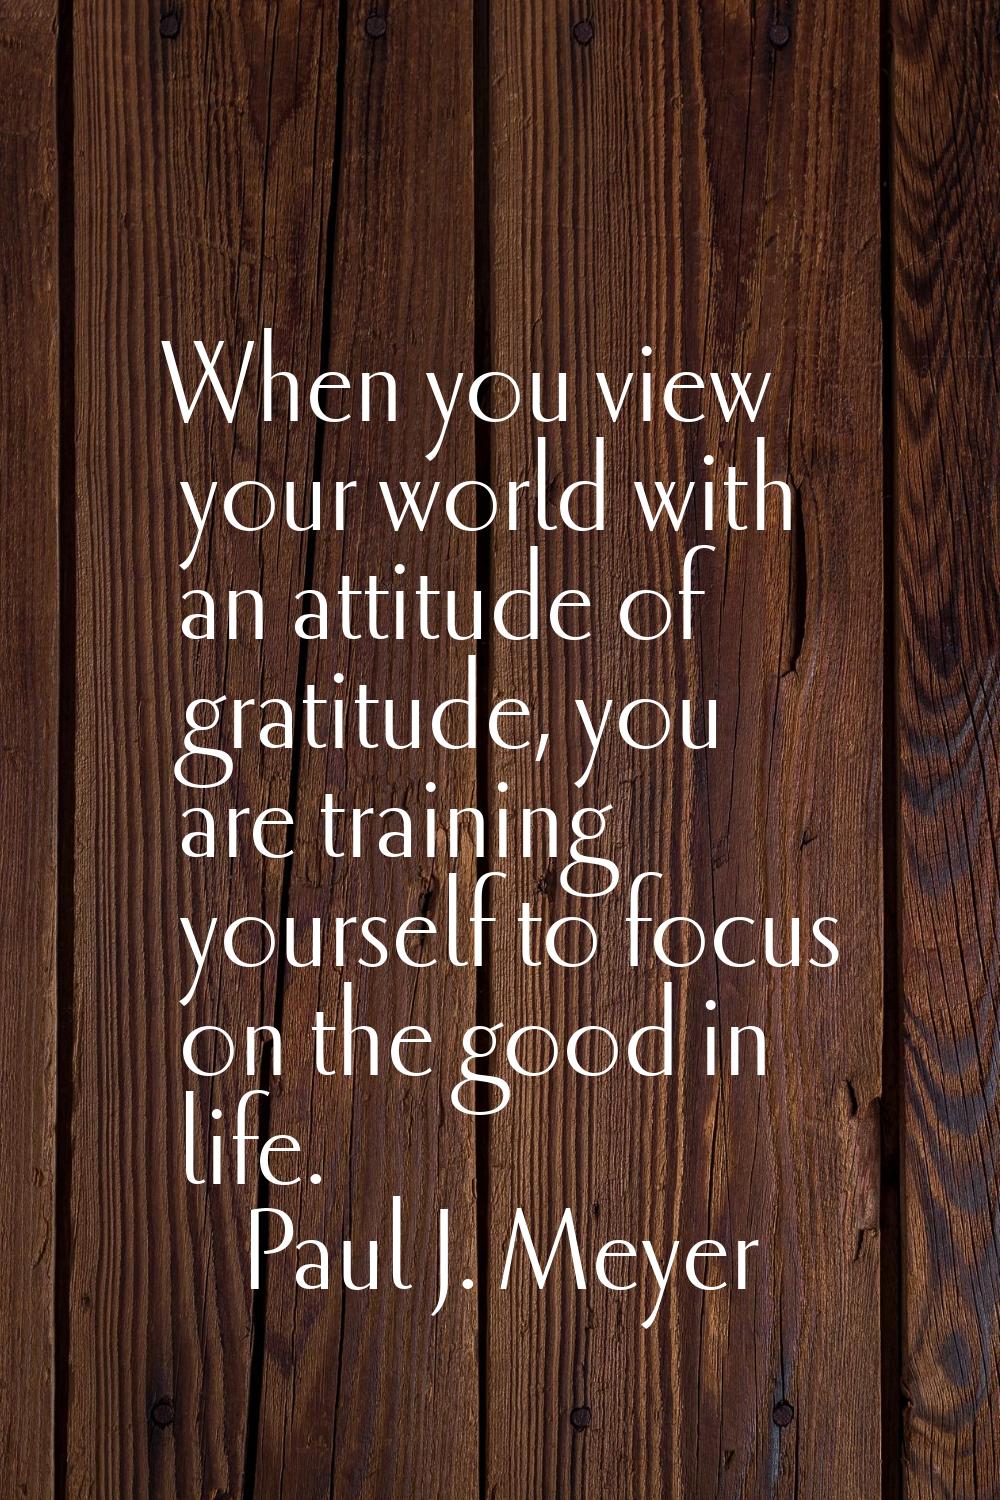 When you view your world with an attitude of gratitude, you are training yourself to focus on the g